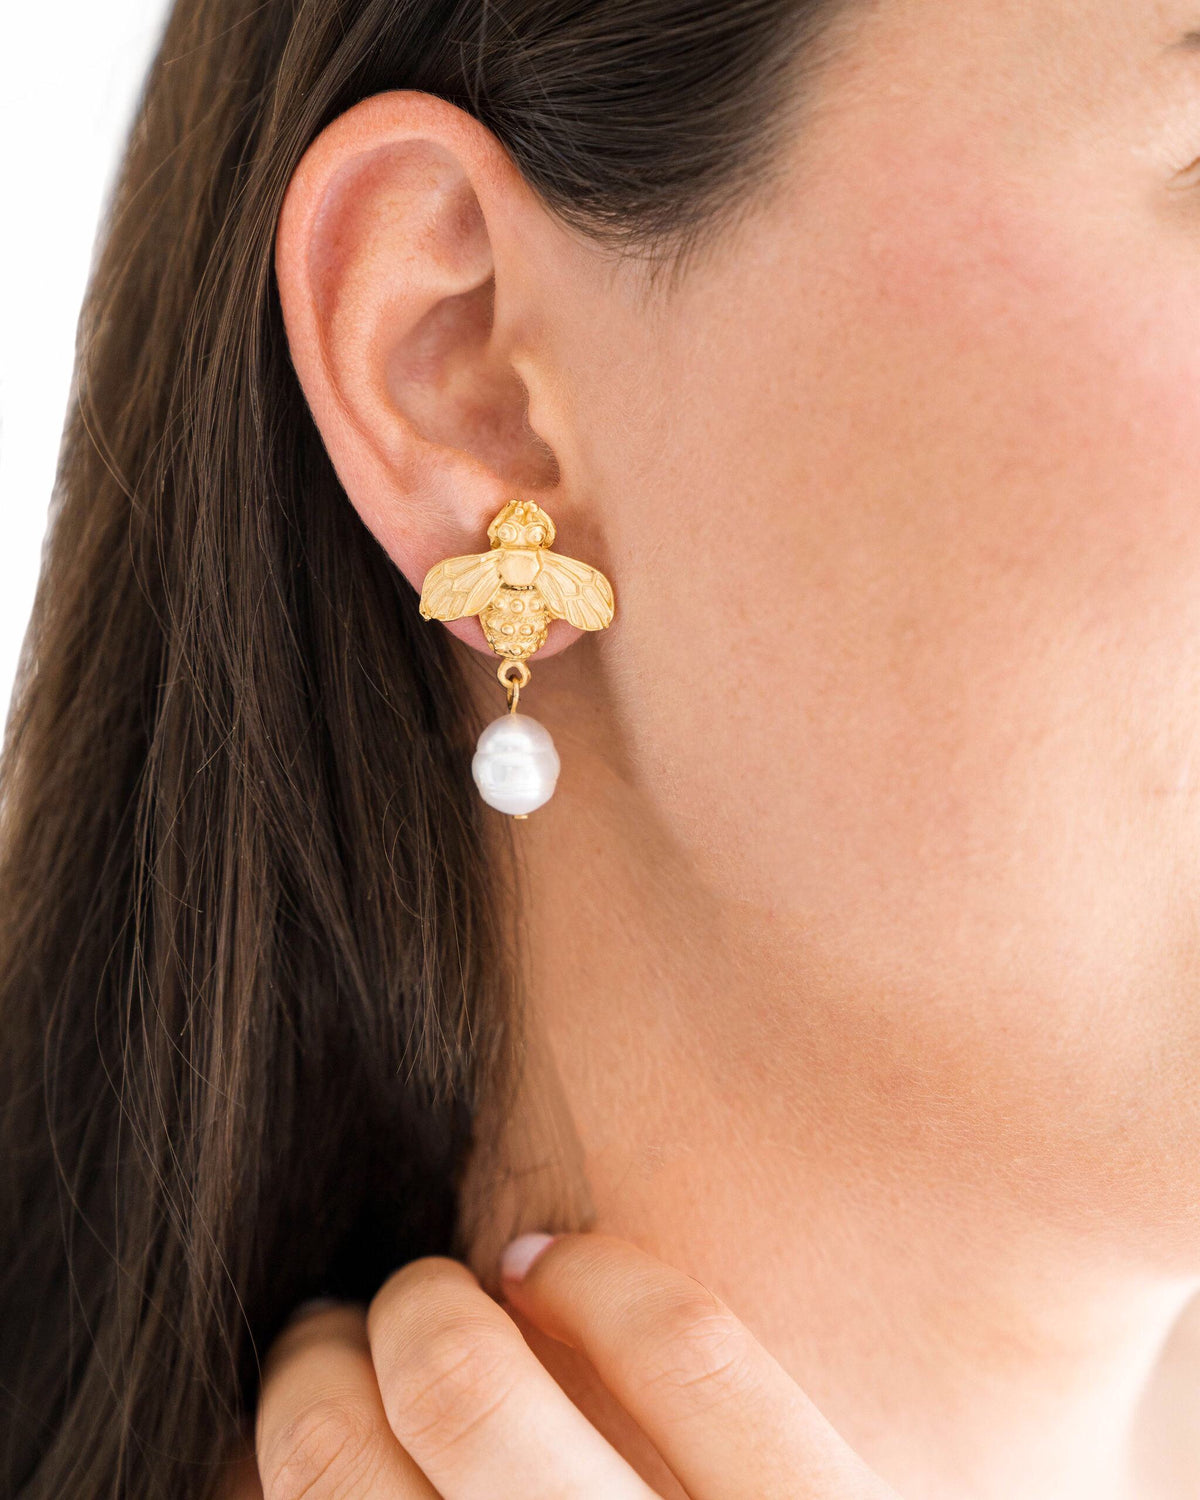 Radial & Contemporary Earrings Featuring White Oval Pearl Drops - Pure  Pearls